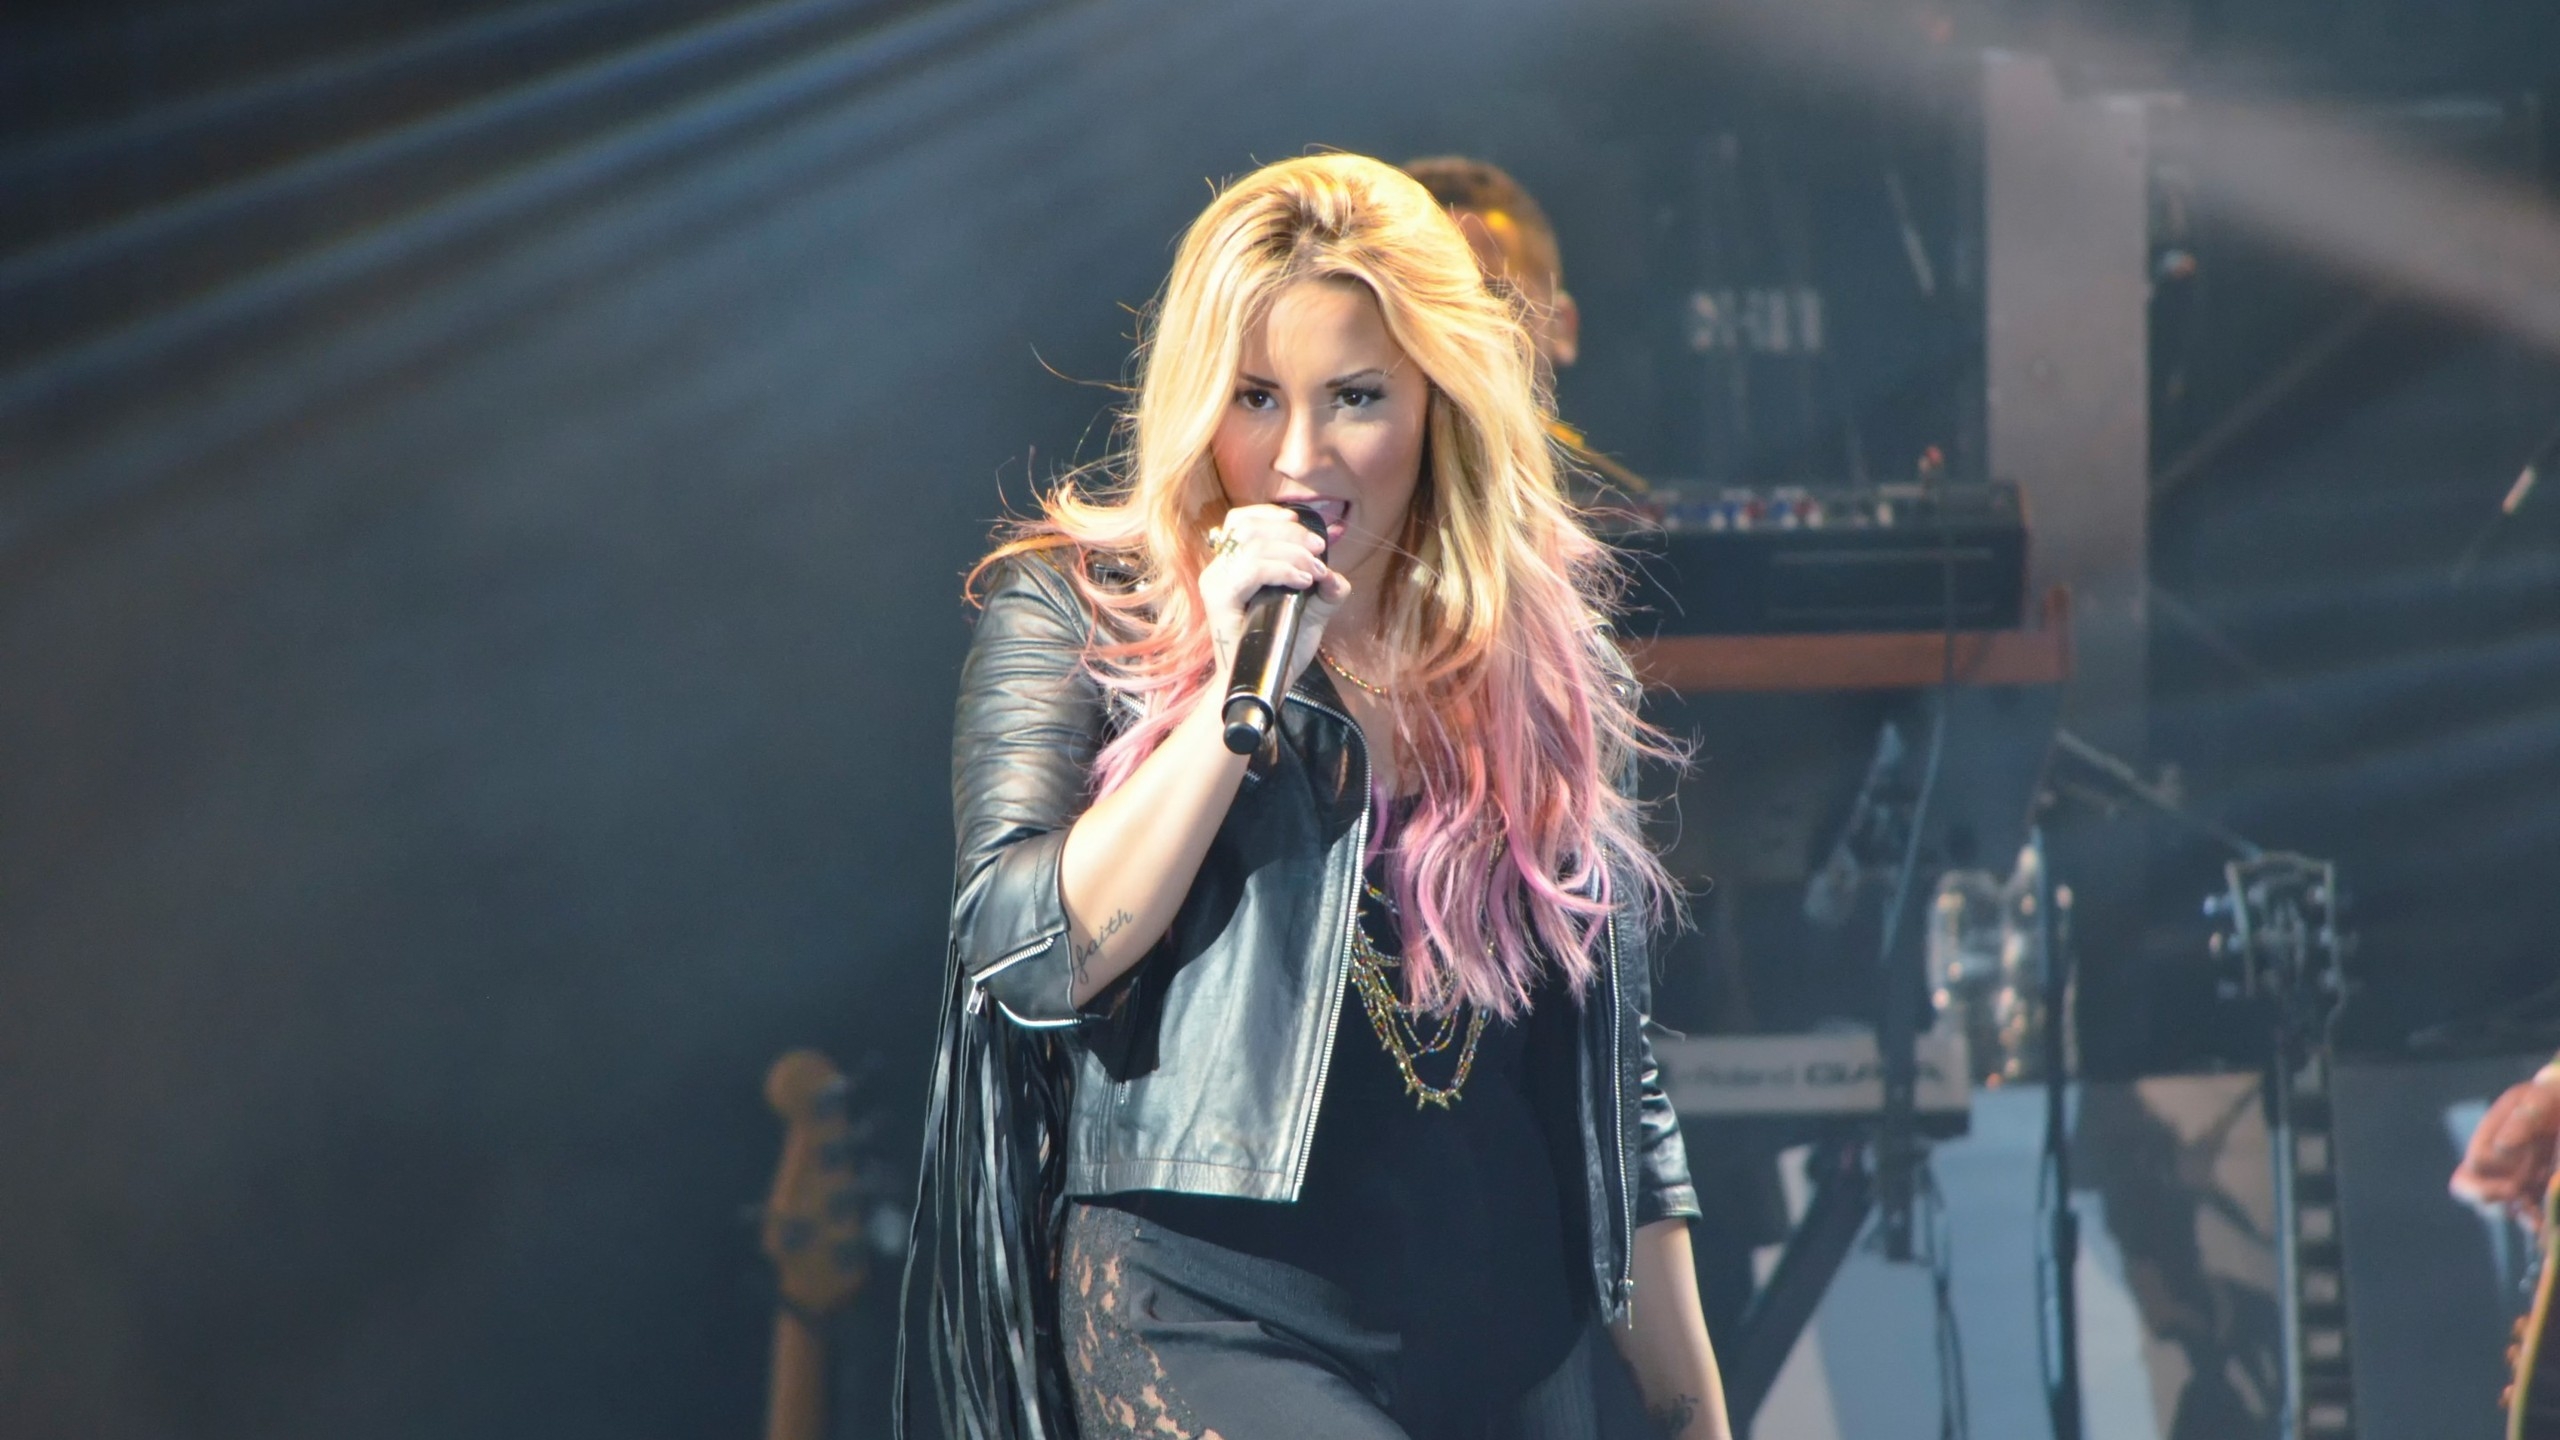 Demi Lovato Performing  for 2560x1440 HDTV resolution